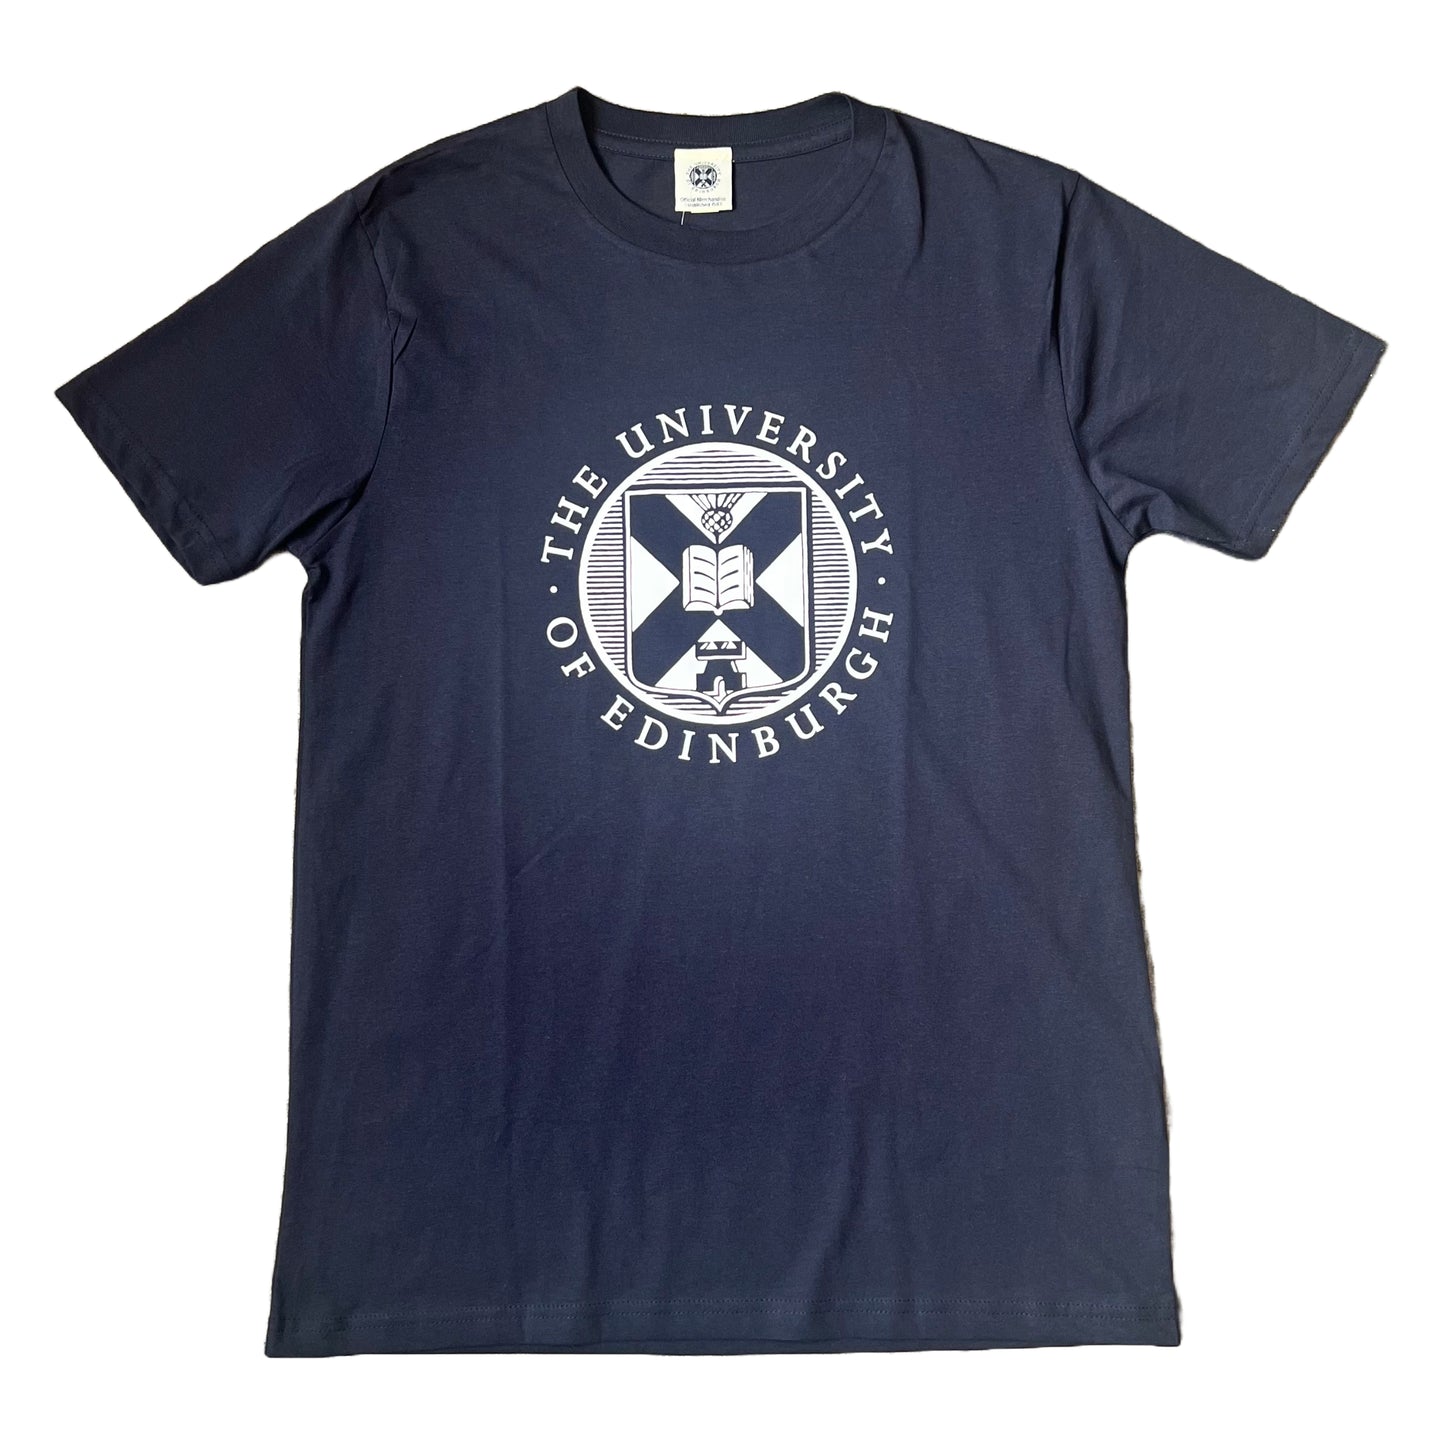 Navy T-Shirt featuring university crest in white